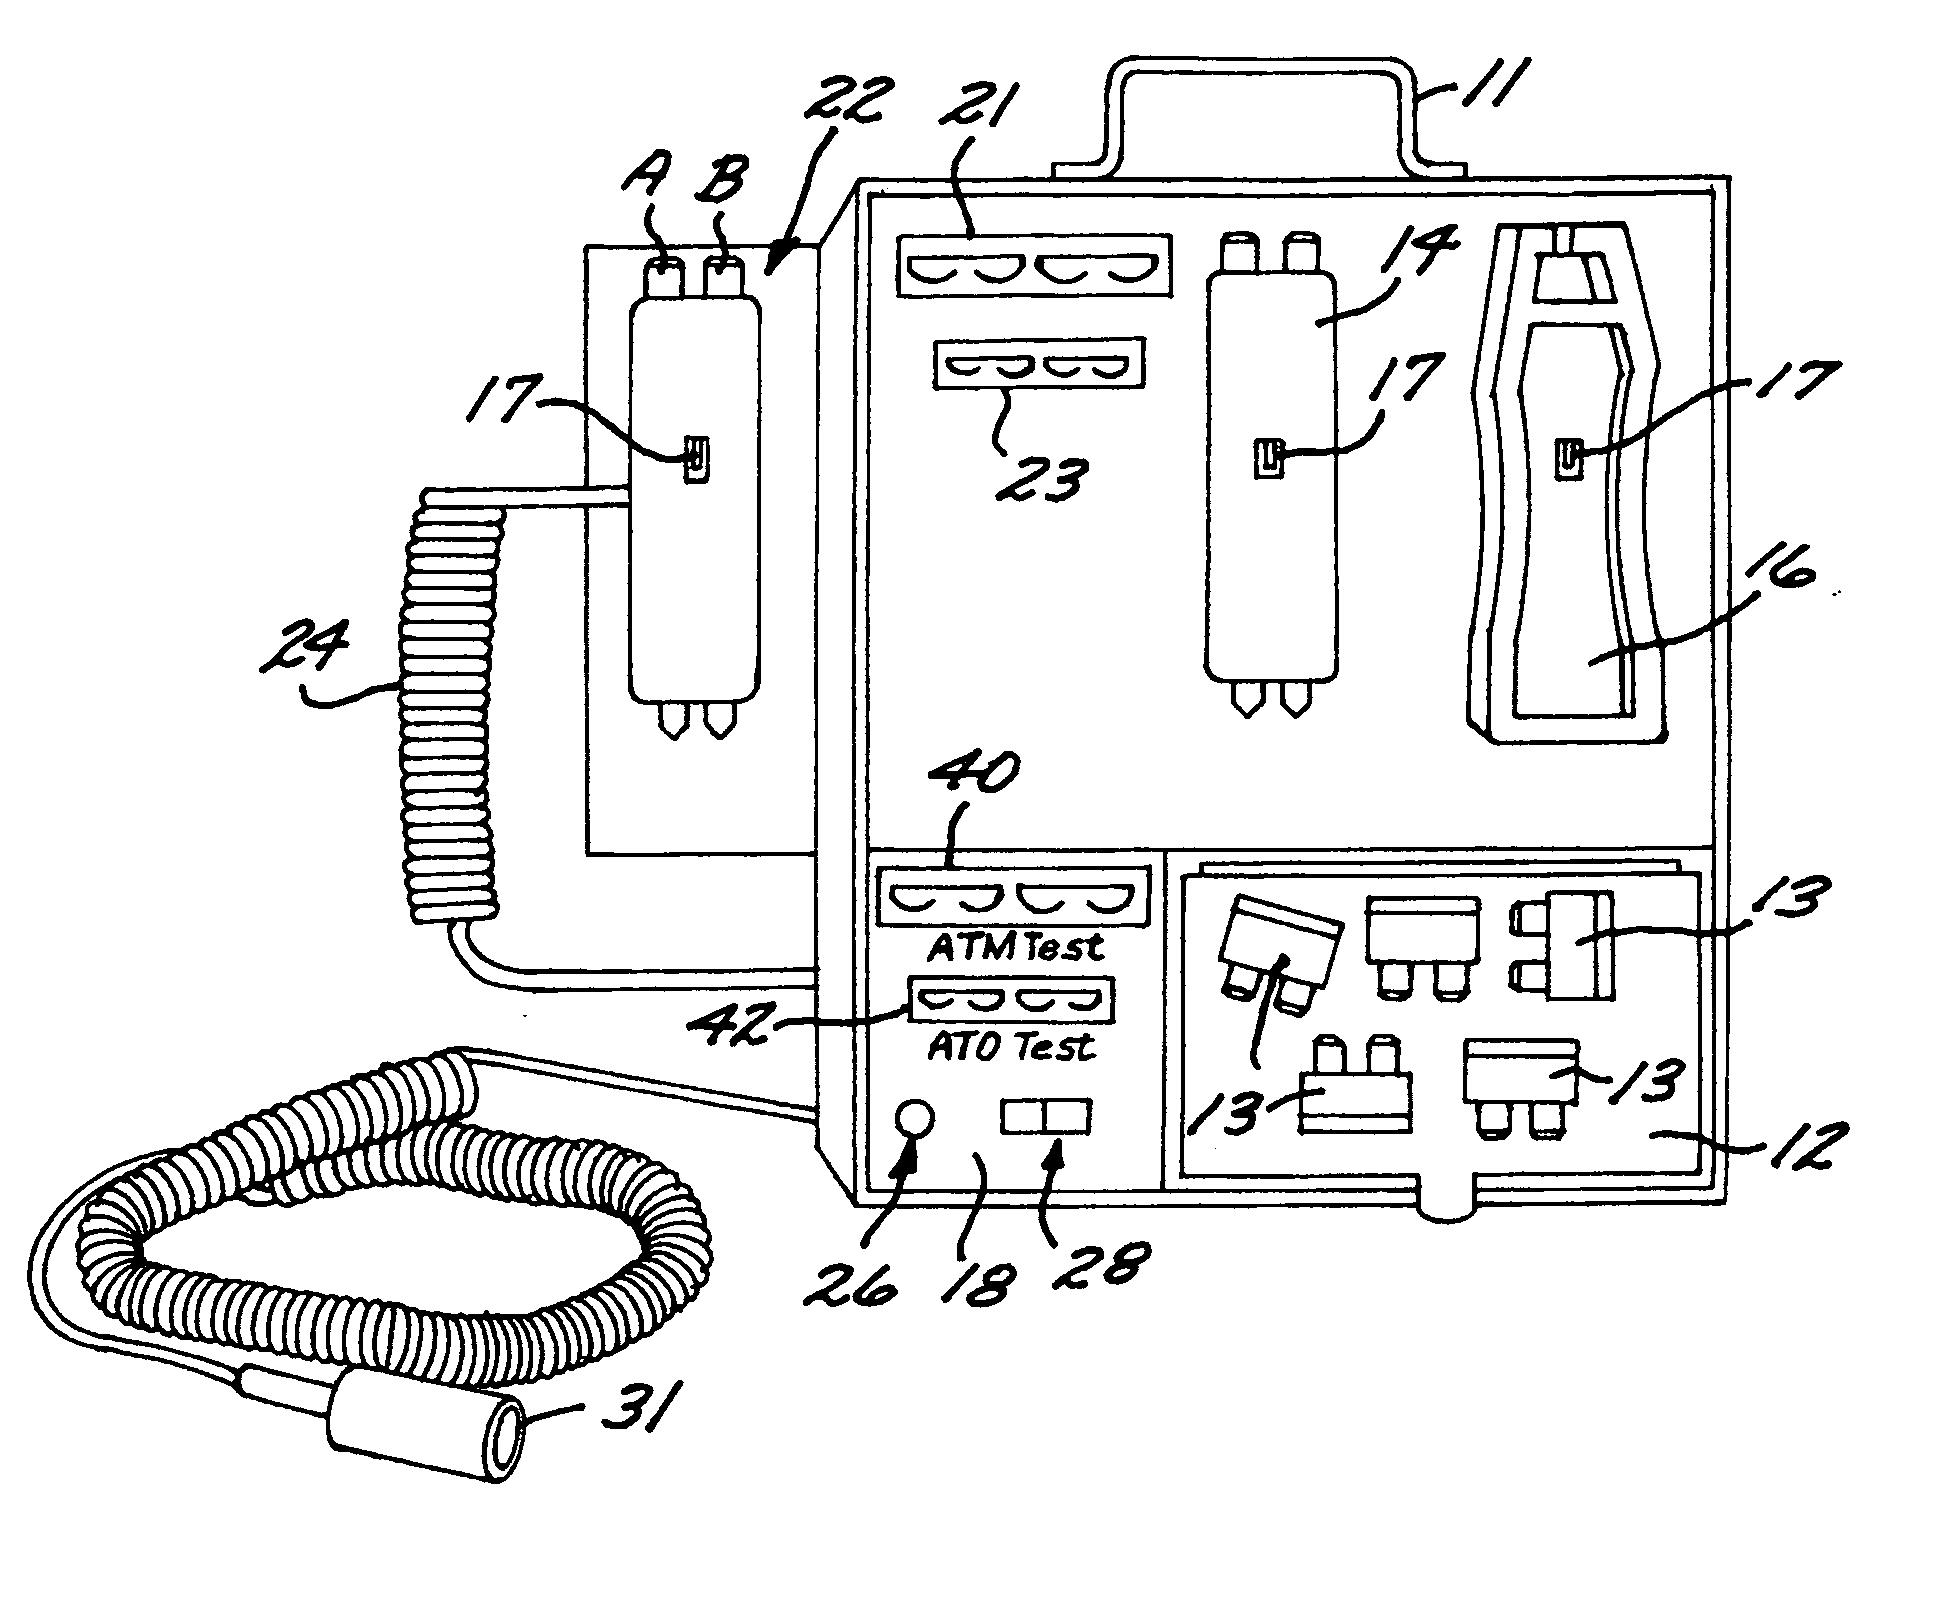 Caddy for fuse related items including fuse prong and receptacle cleaning tools